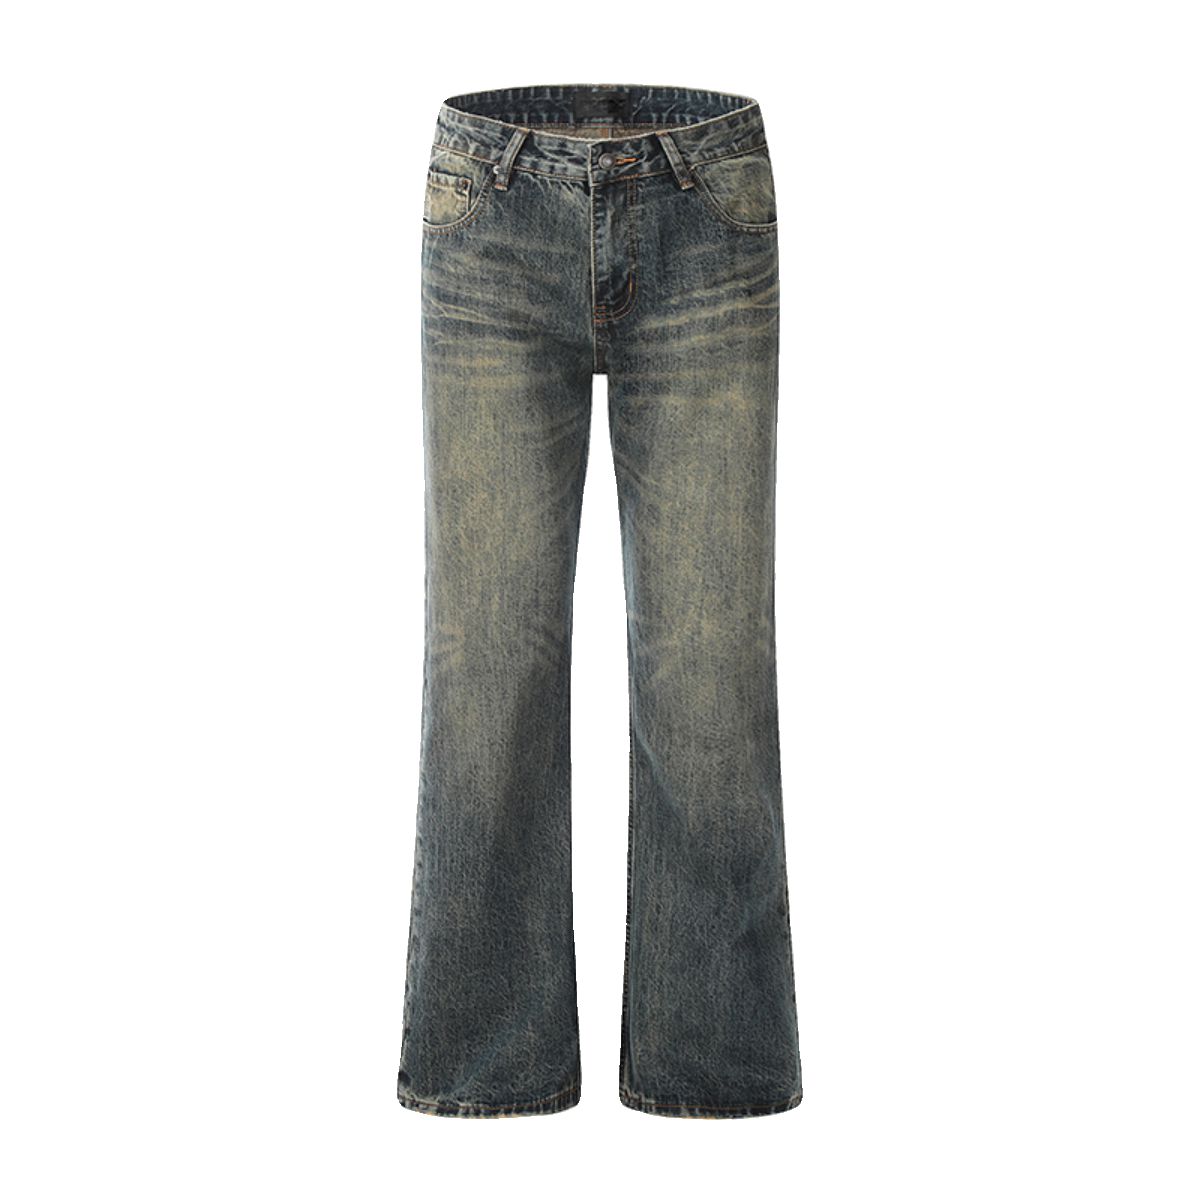 Washed and Faded Vintage Jeans Korean Street Fashion Jeans By A PUEE Shop Online at OH Vault